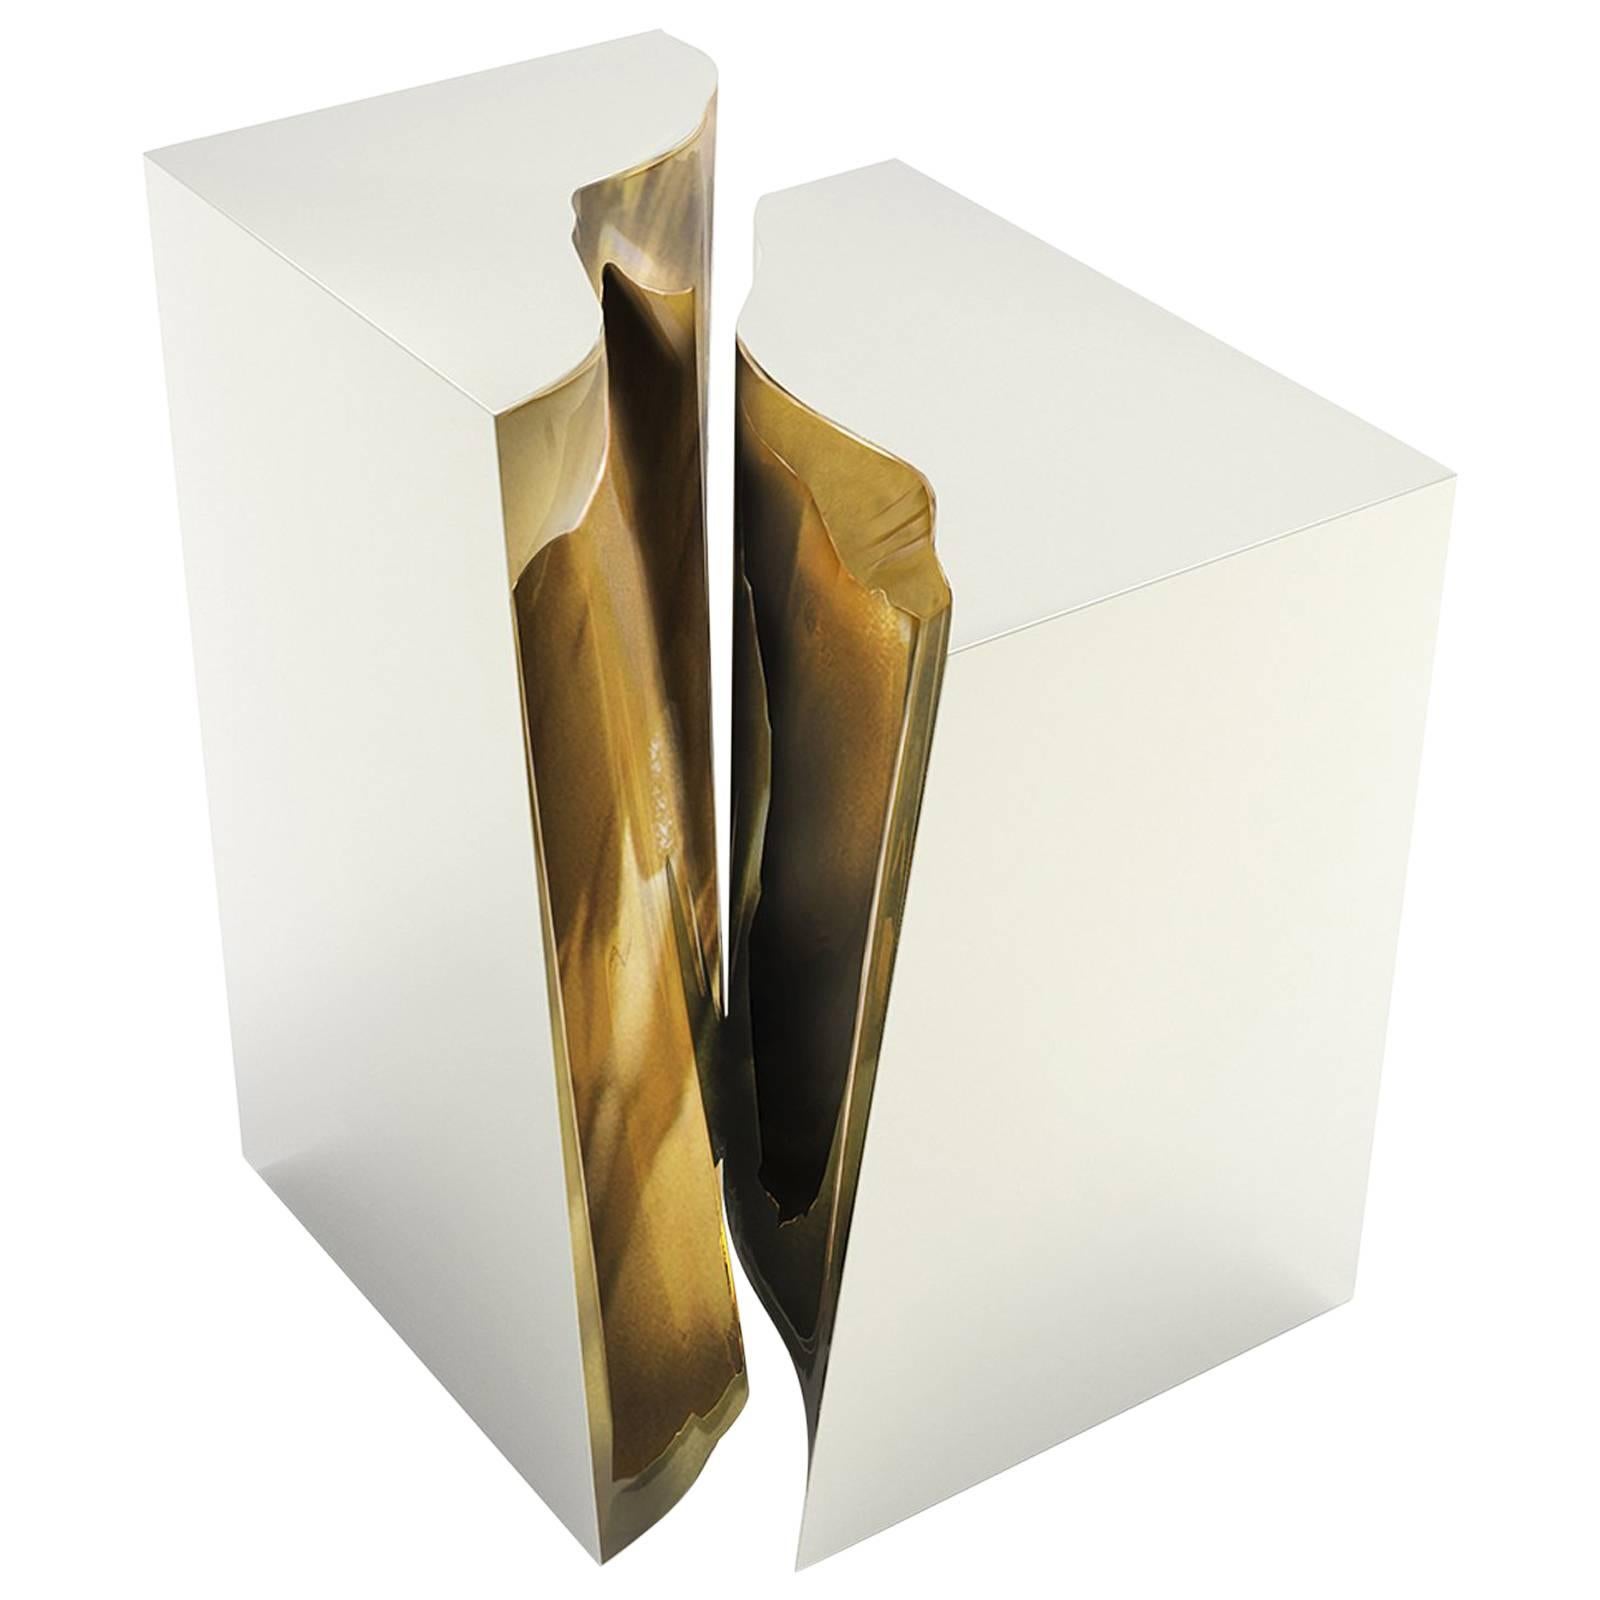 Paradise Side Table in Coated polished stainless steel and Polished Brass